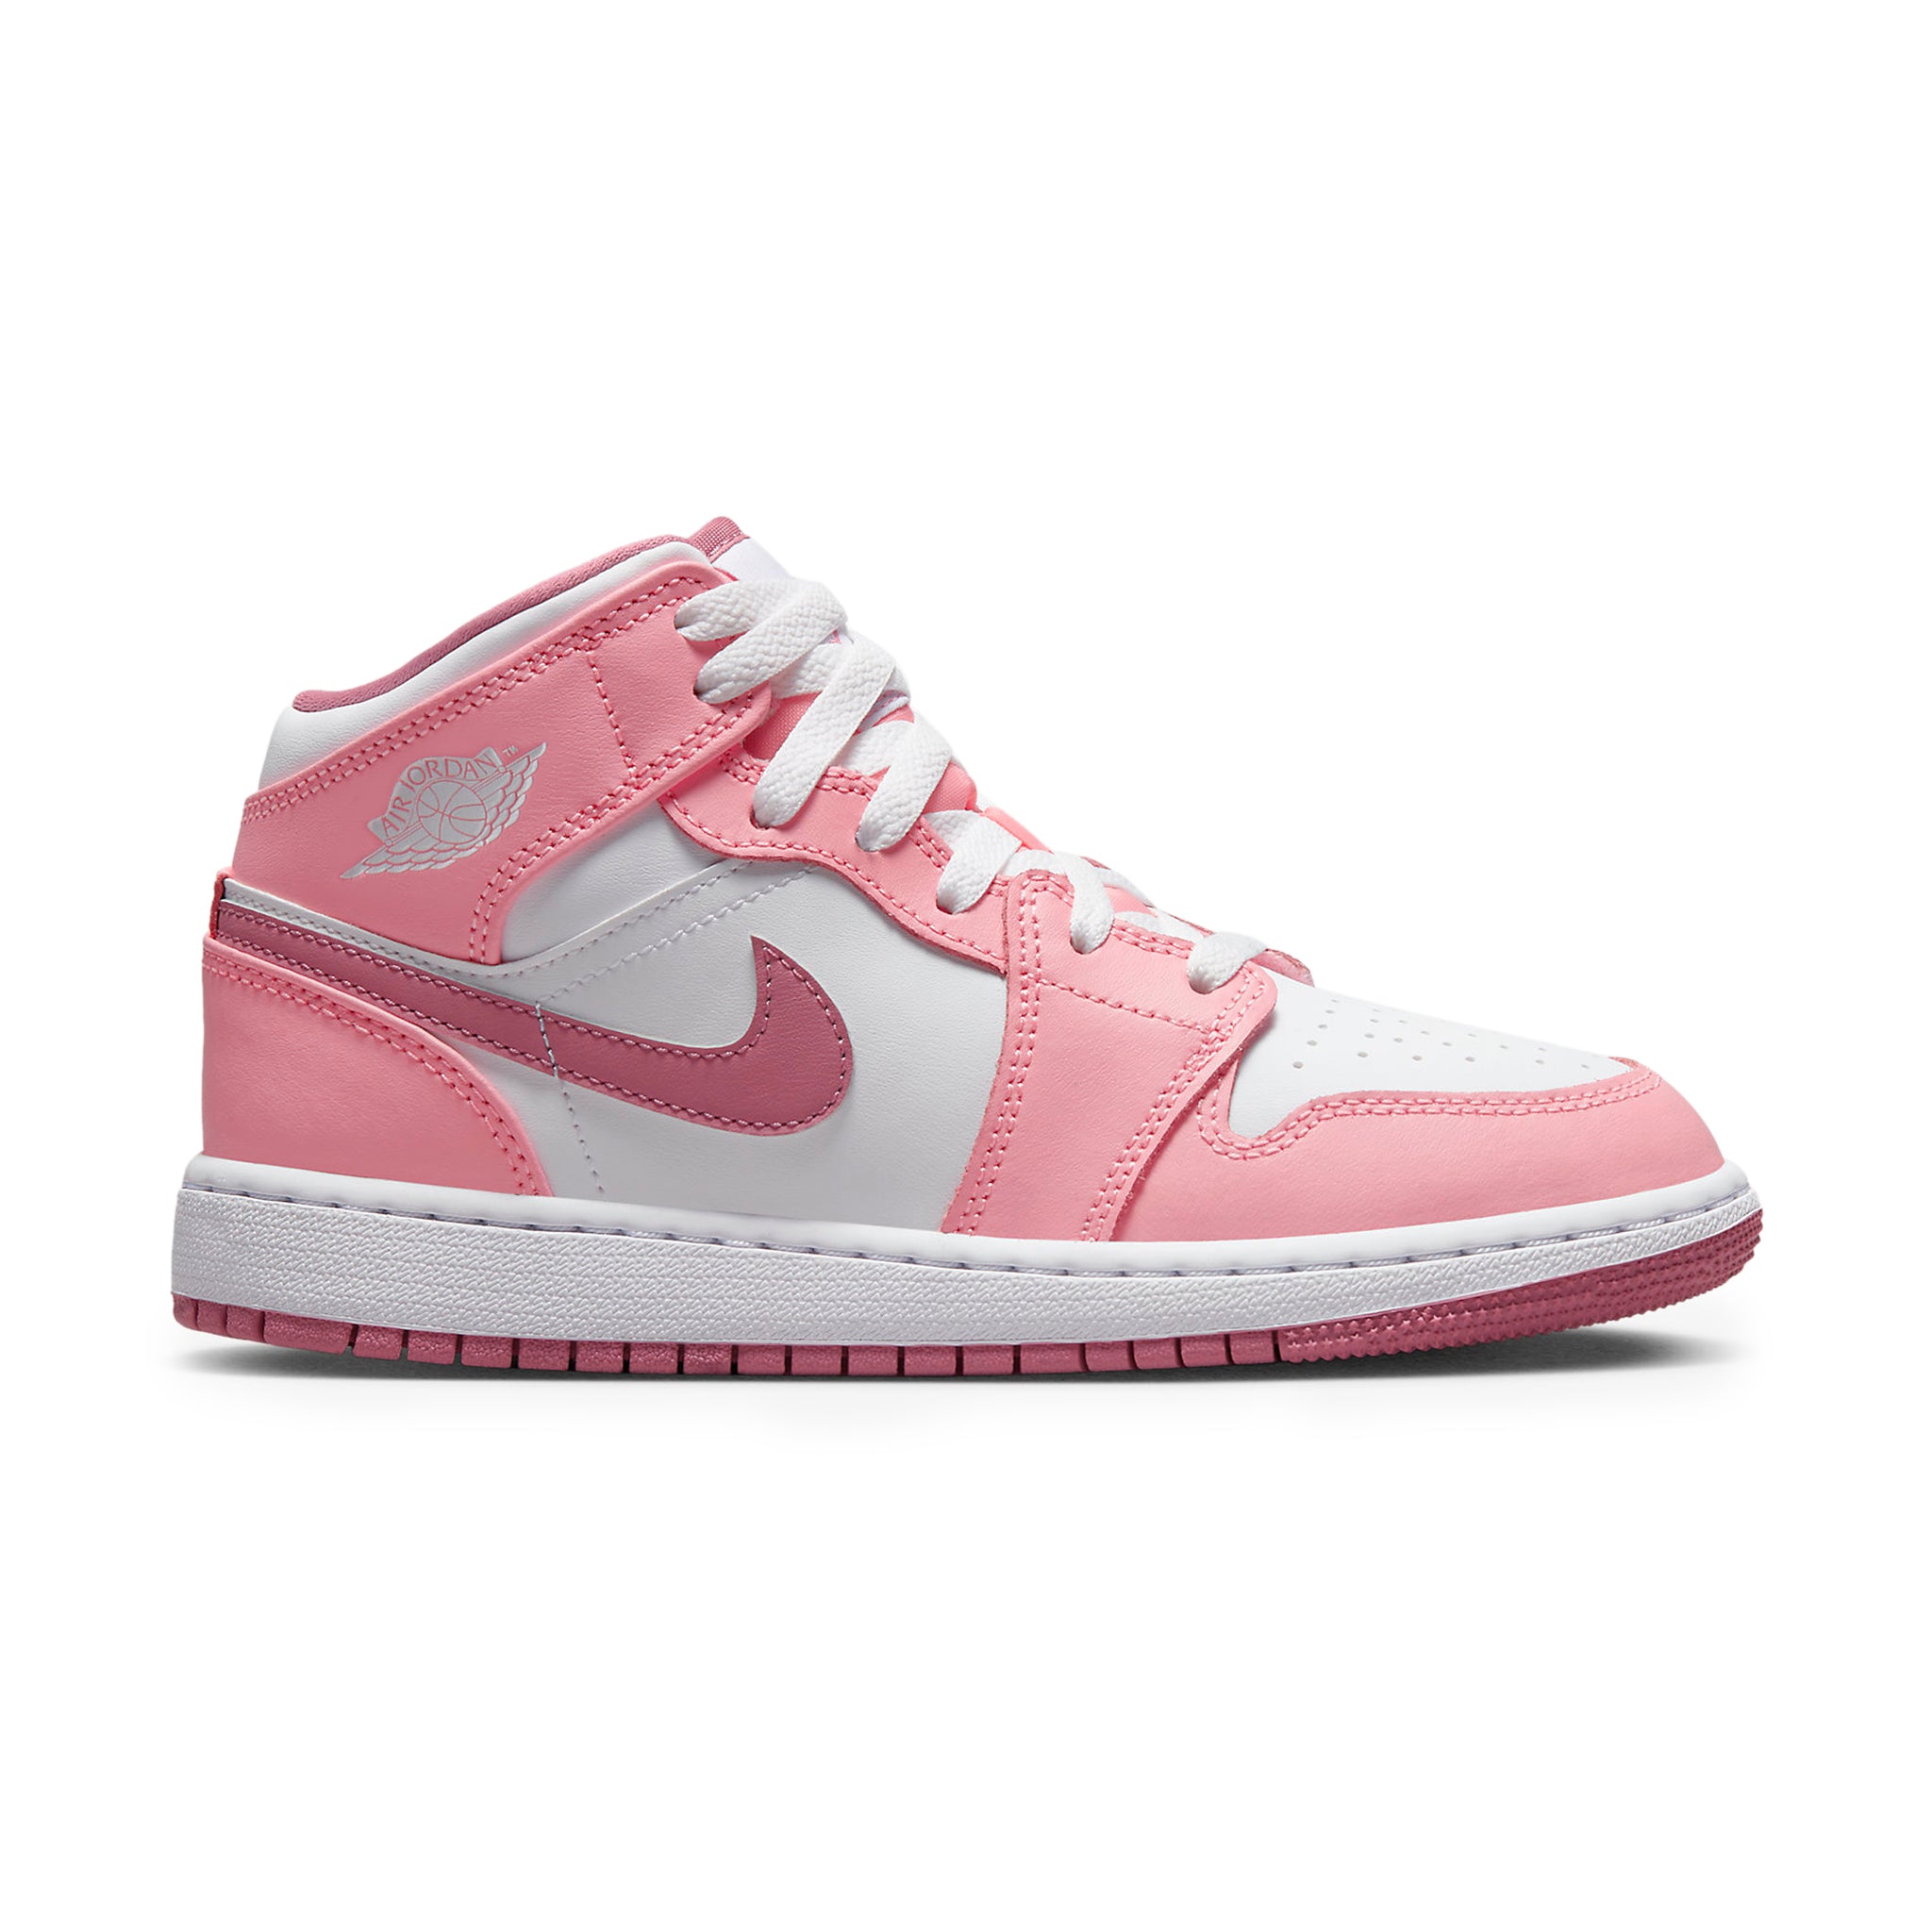 Side view of Air Wmns Air into jordan 1 Mid 'Wolf Grey Aluminum' BQ6472 105 Valentine's Day (2023) (GS) DQ8423-616